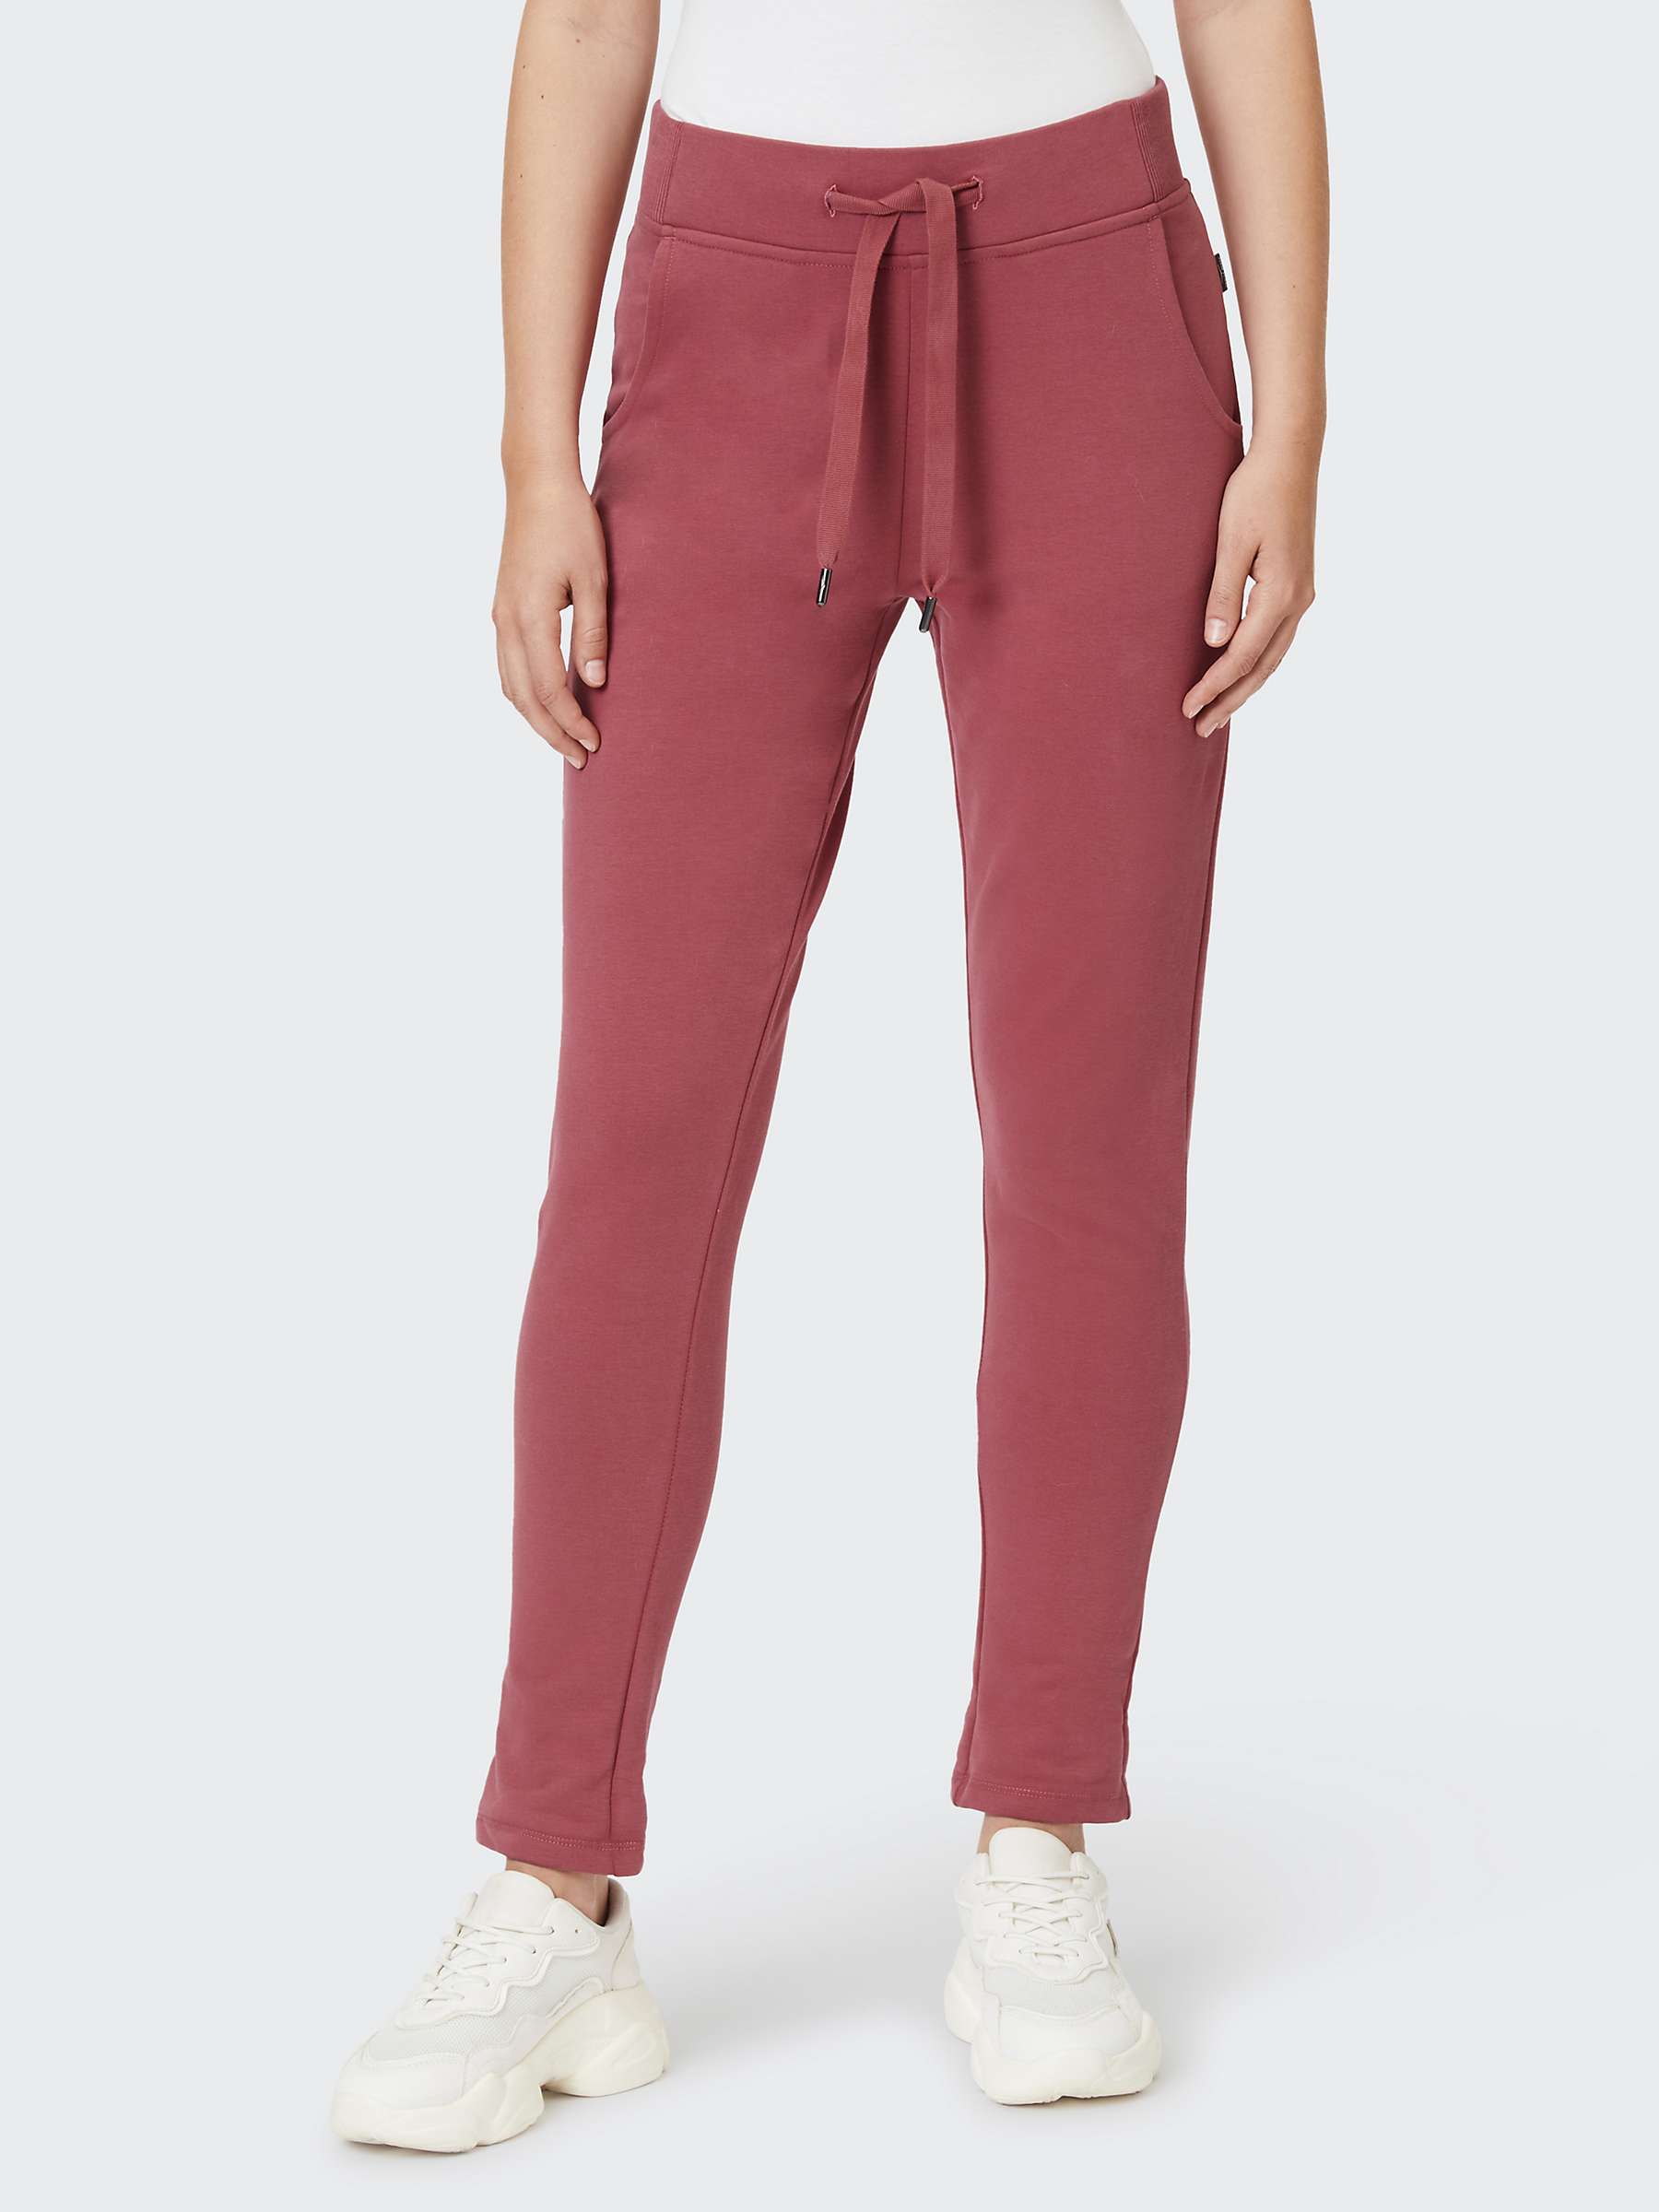 Buy Venice Beach Sherly Cotton Blend Joggers Online at johnlewis.com